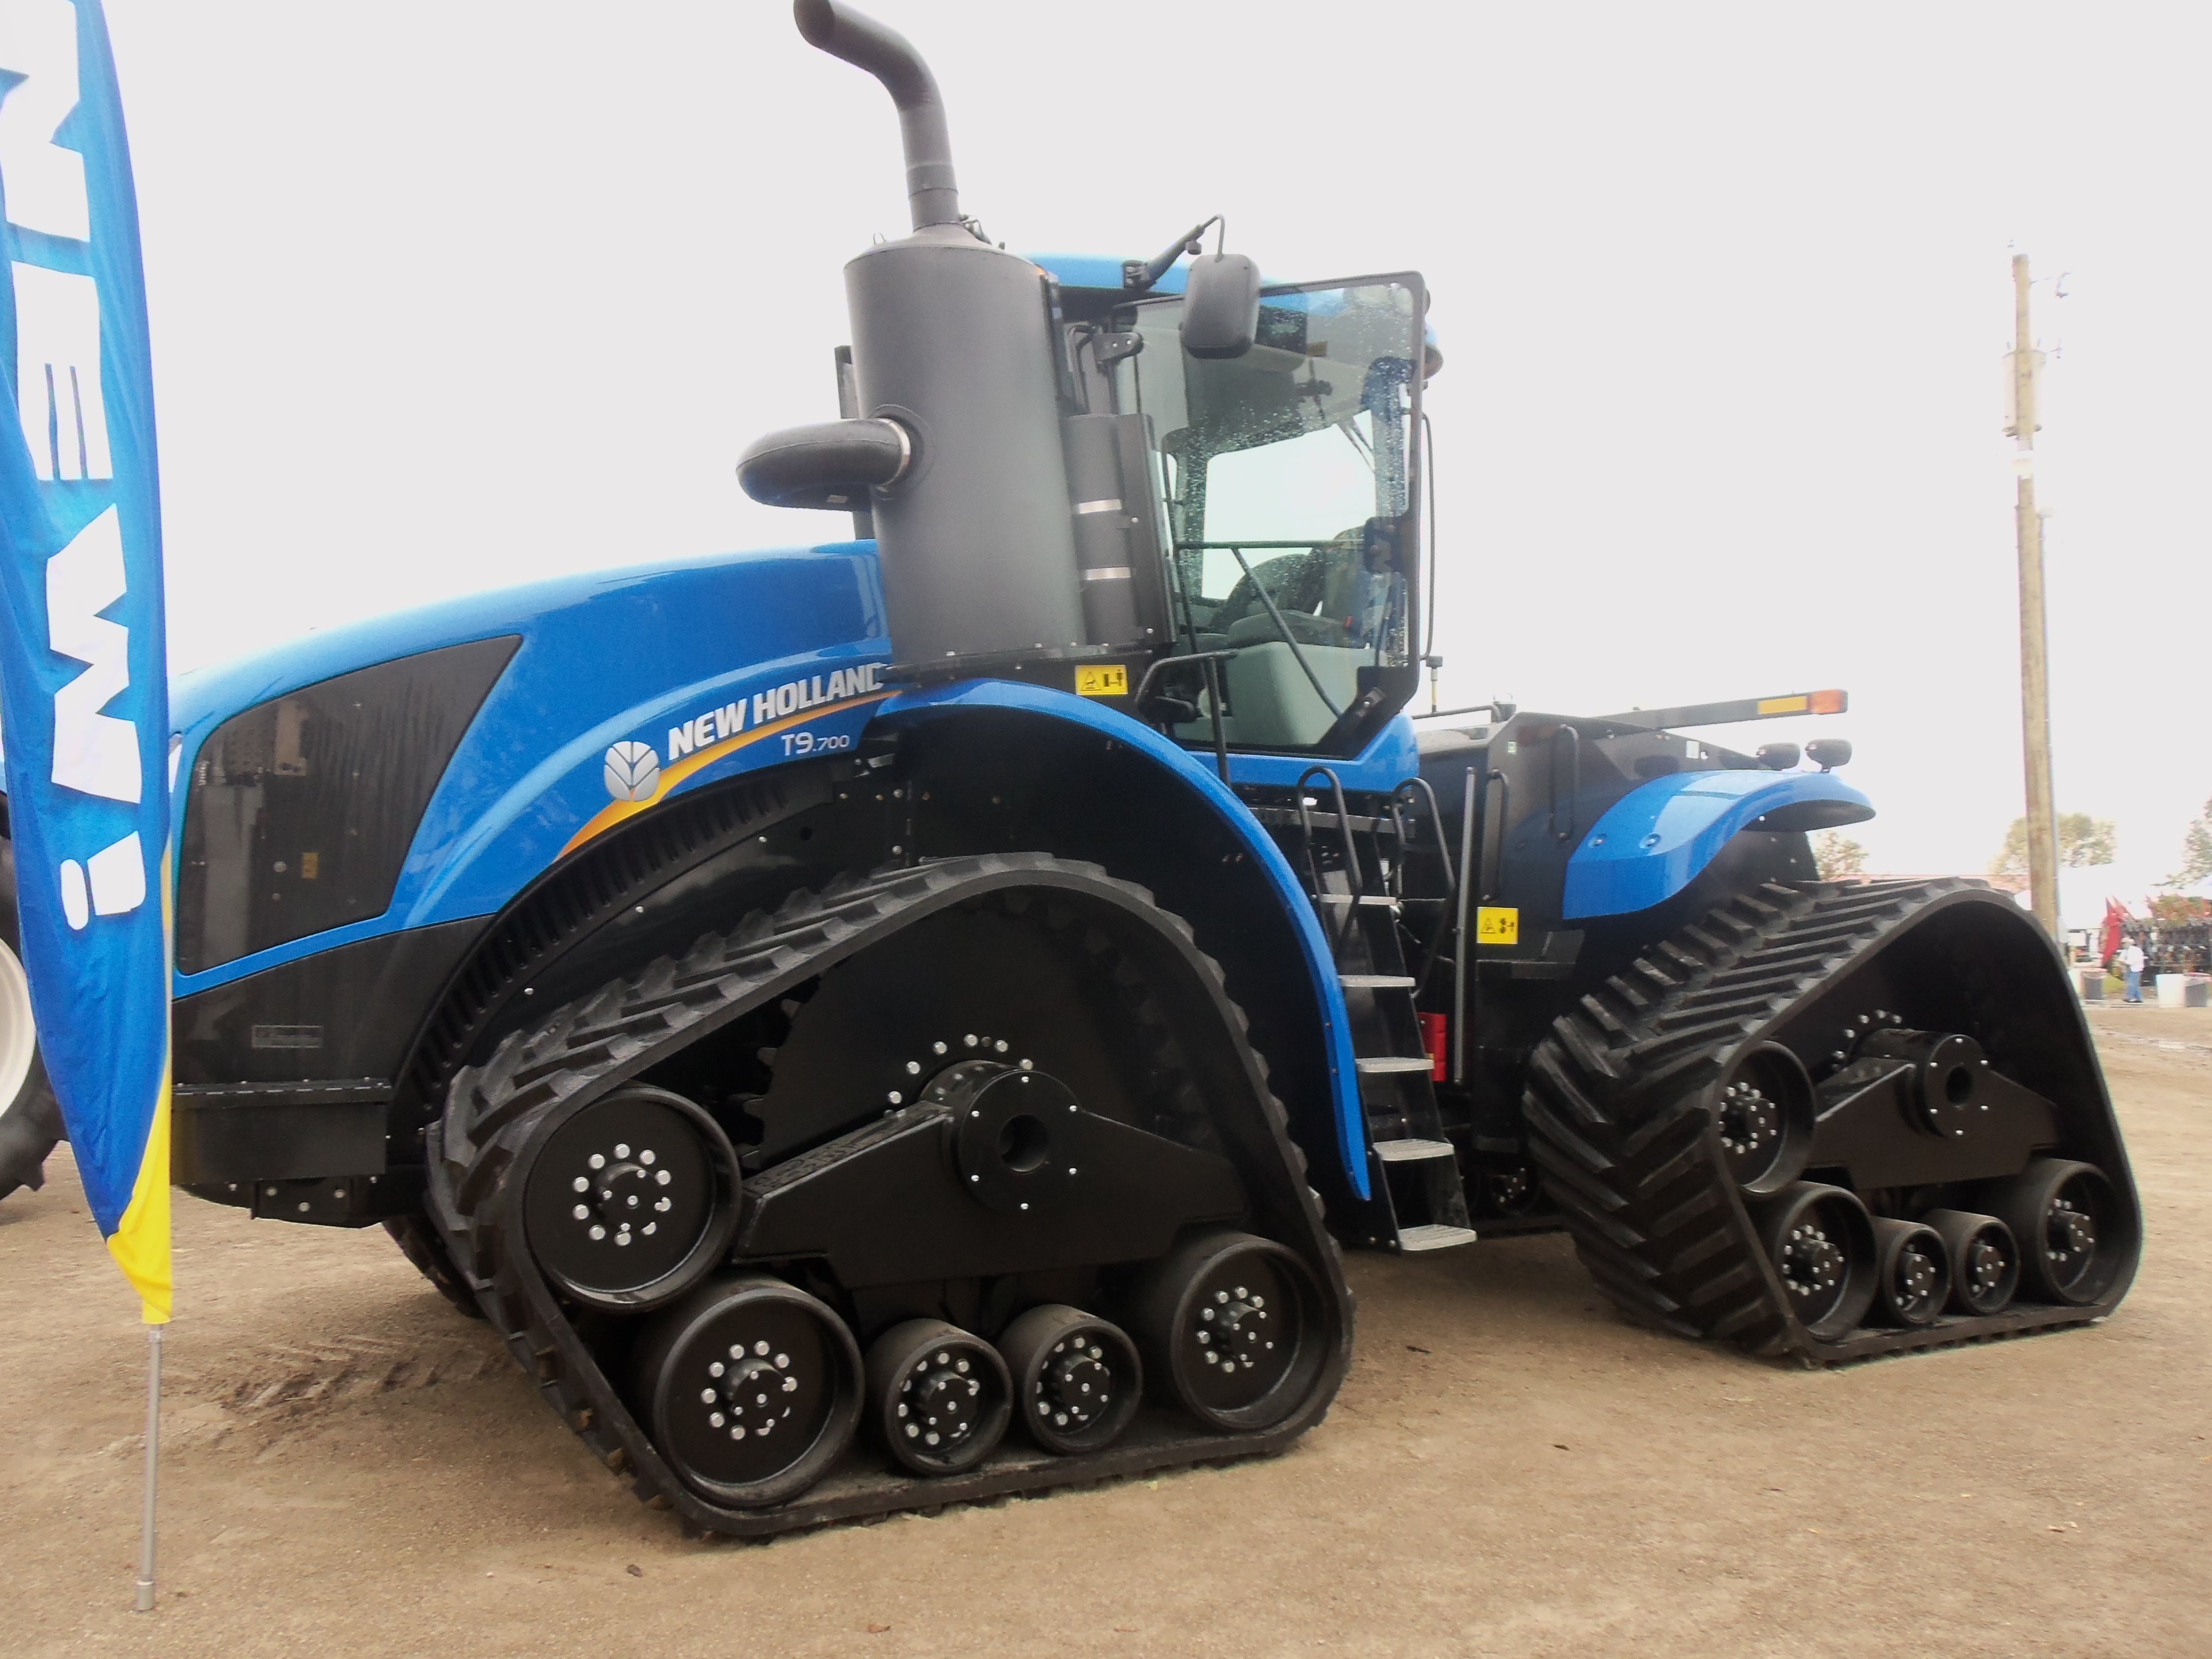 New Holland Tractor #19